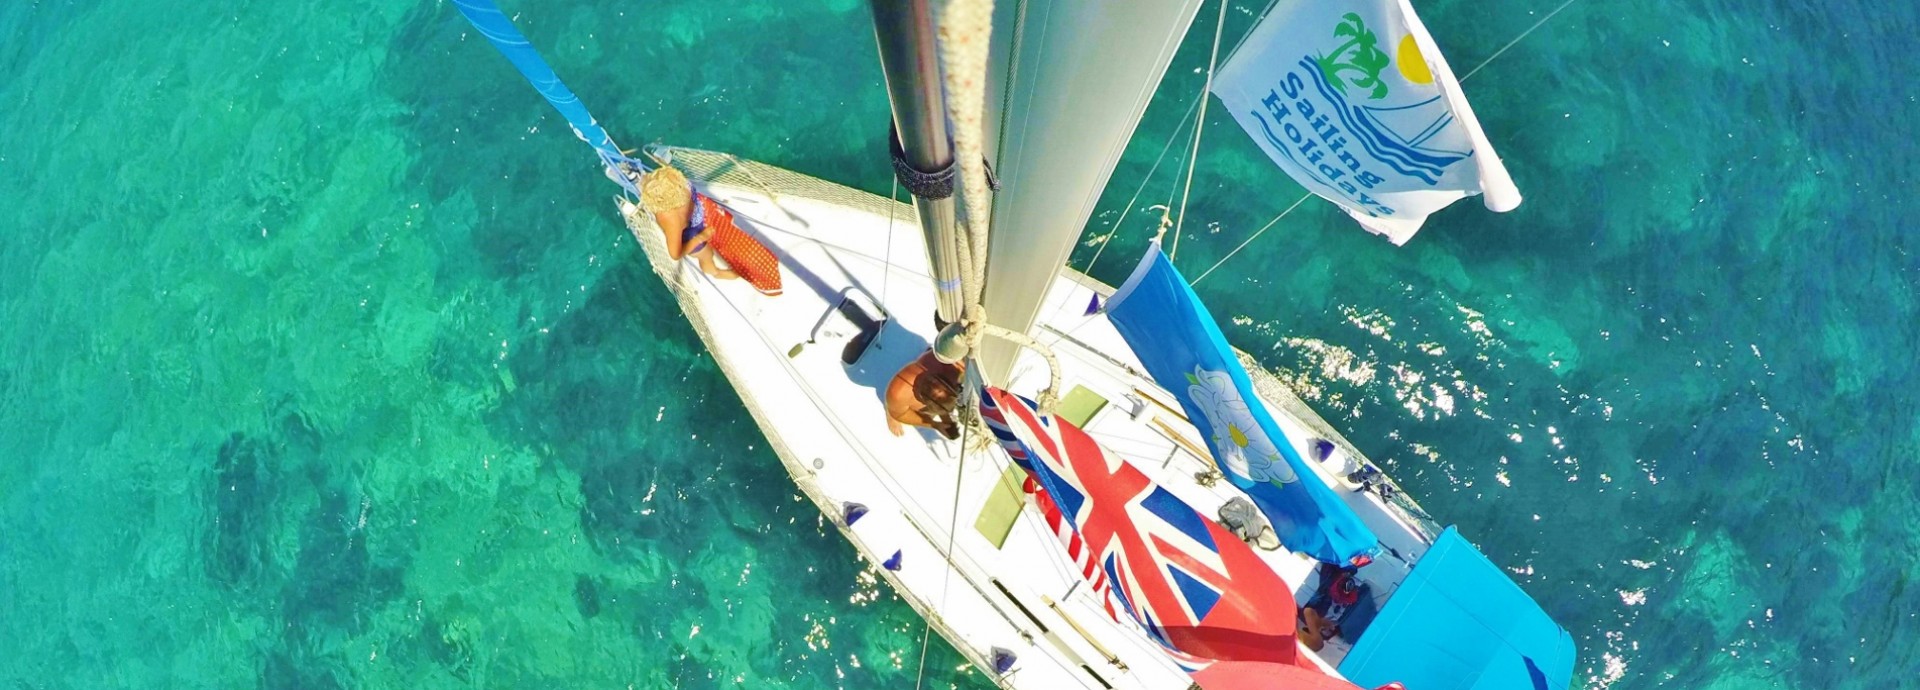 Beneteau 323 from above